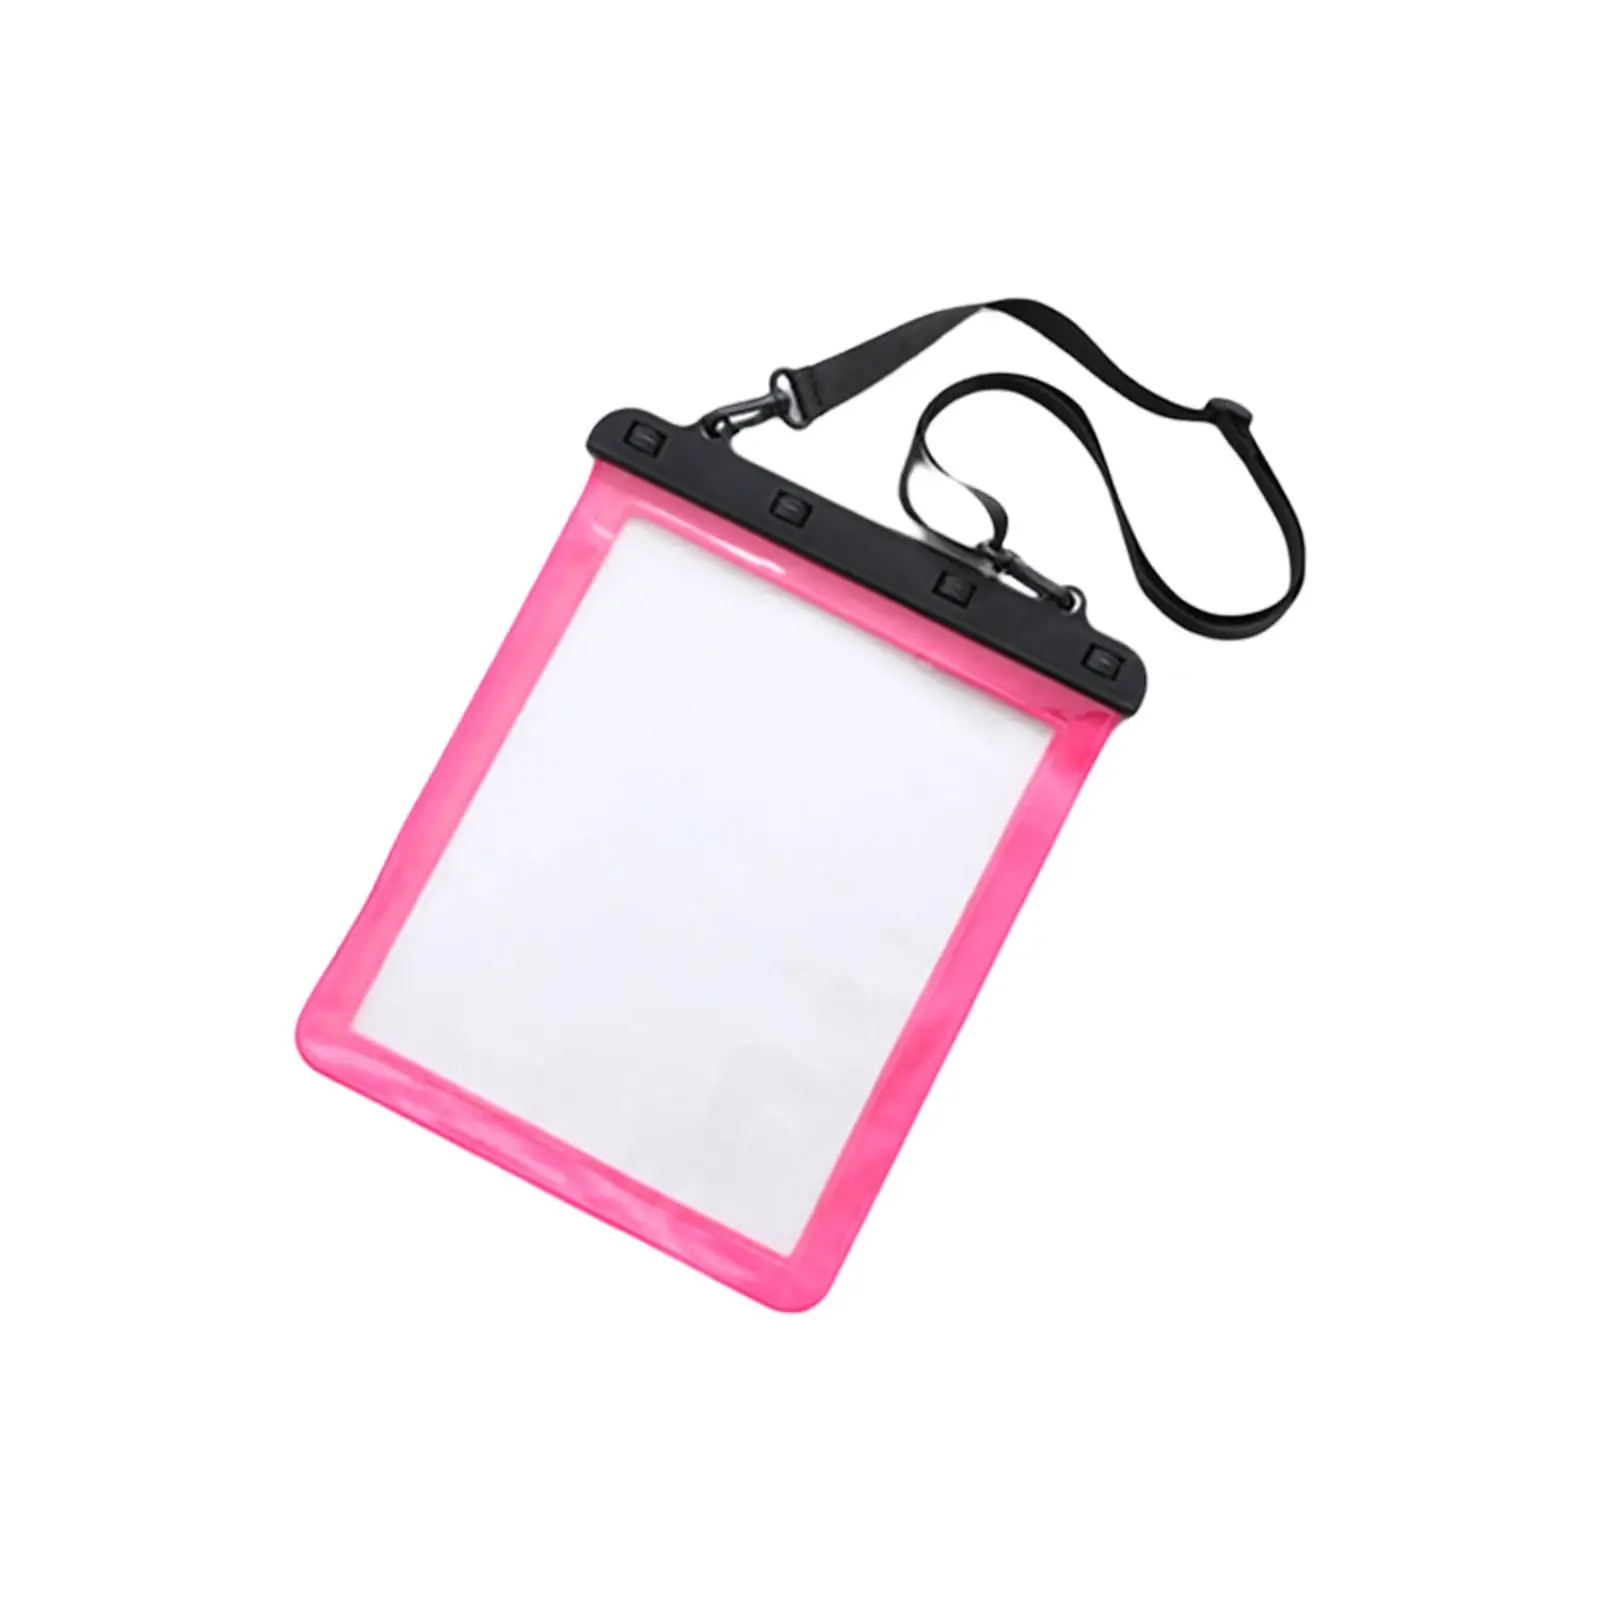 Clear Waterproof Bag Portable Waterproof Phone Pouch with Adjustable Strap for Rafting Kayaking Outdoor Boating Snorkeling